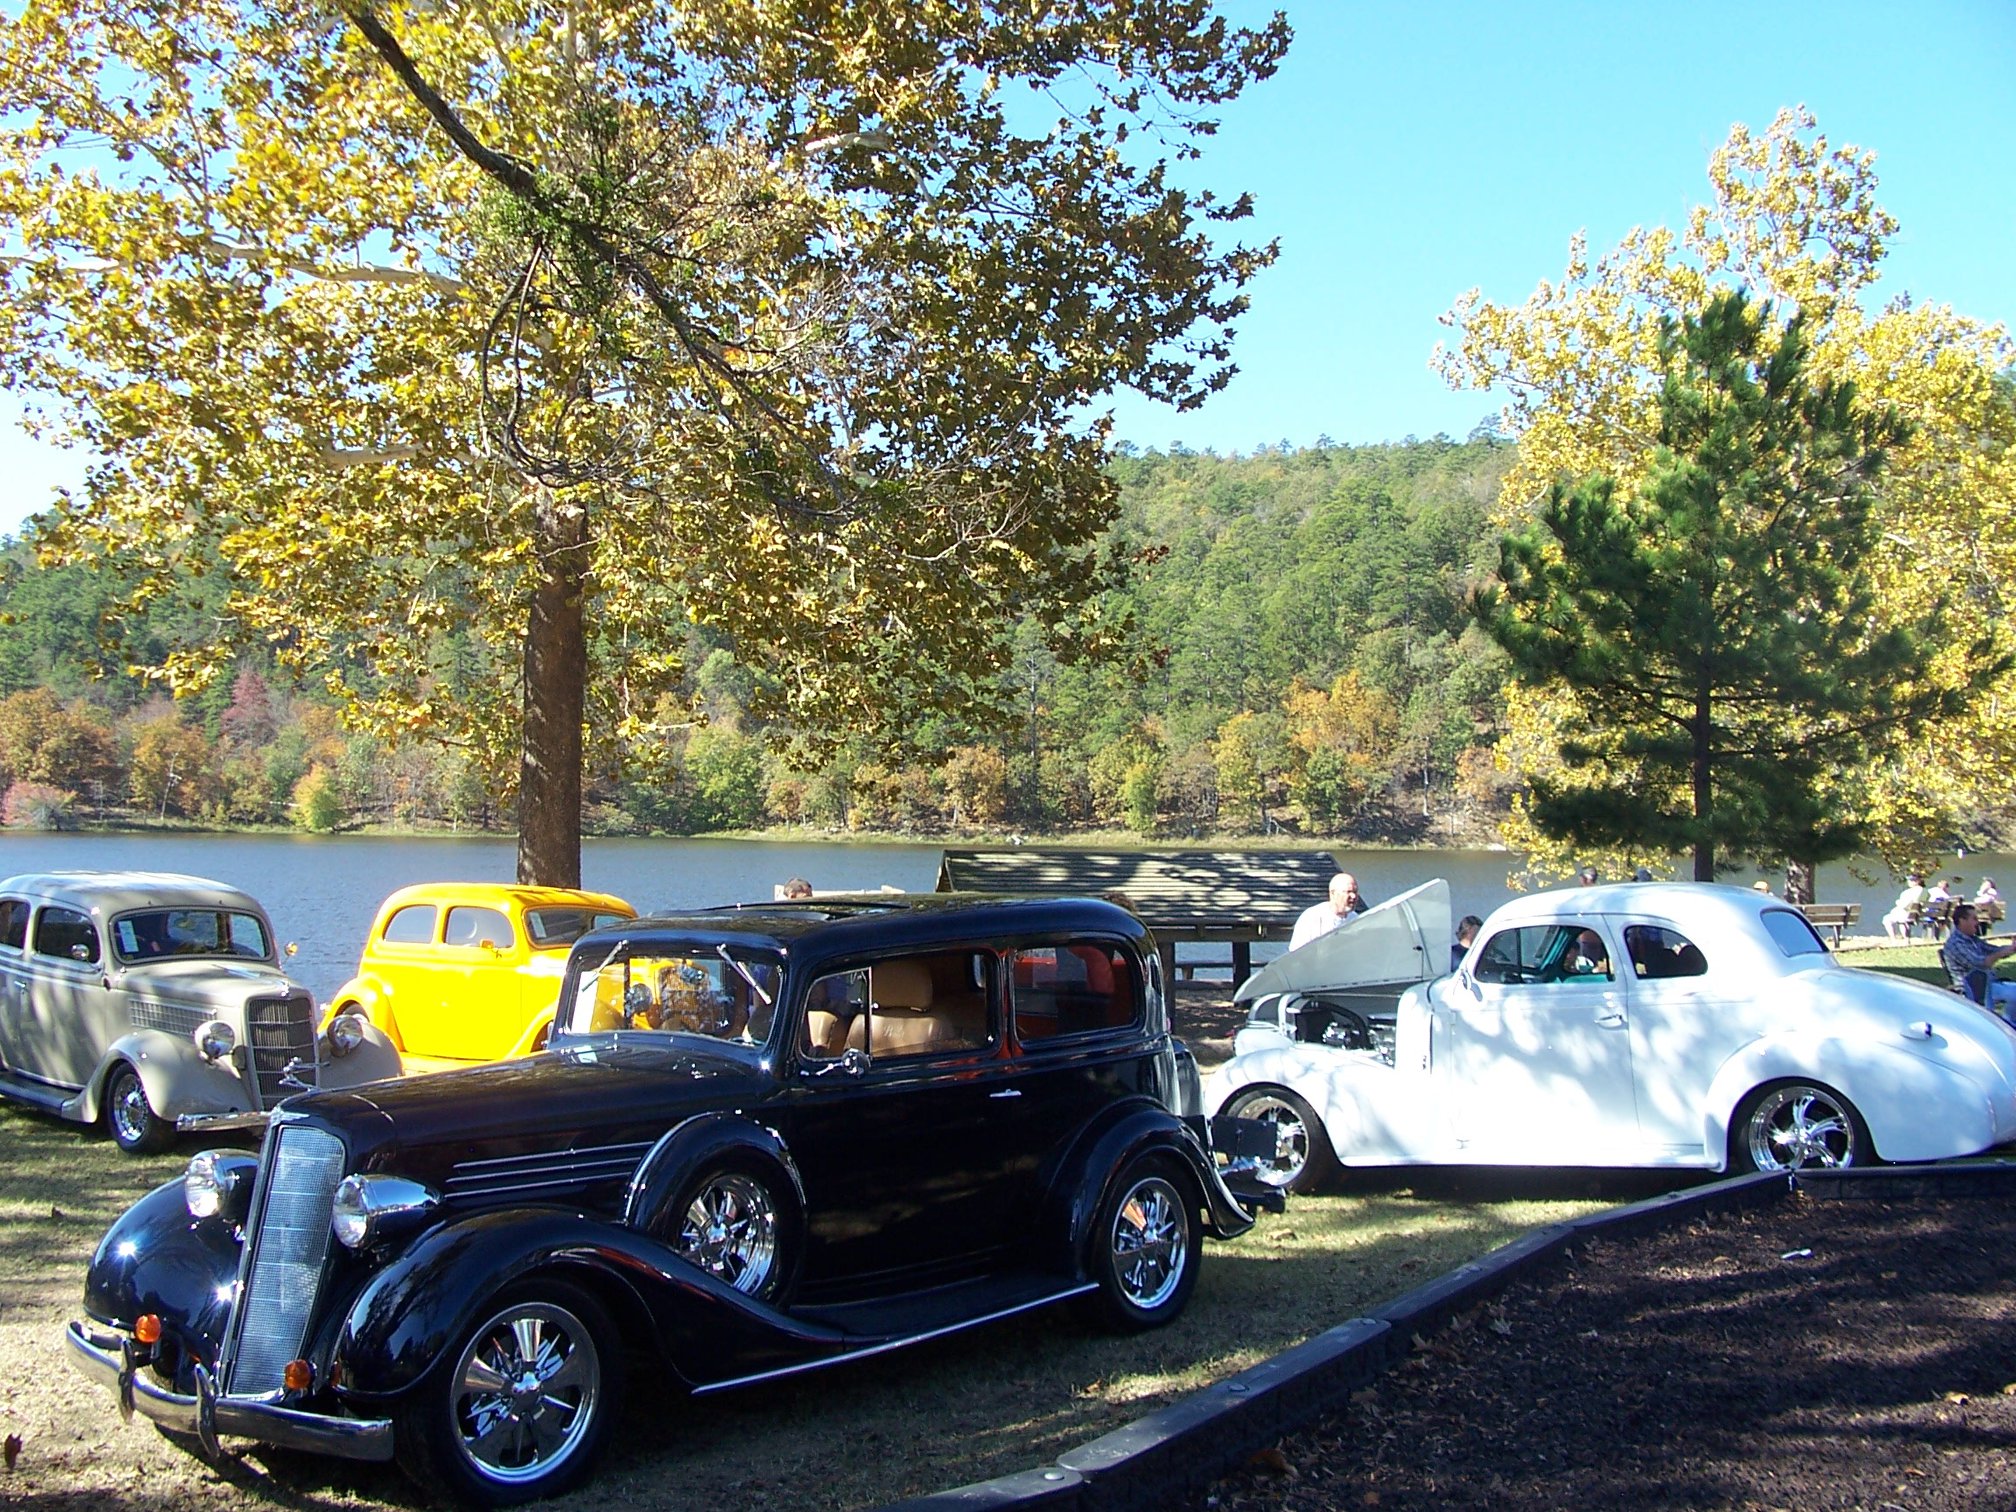 Annual Robbers Cave State Park Fall Festival is back on during ’21 Fall Break